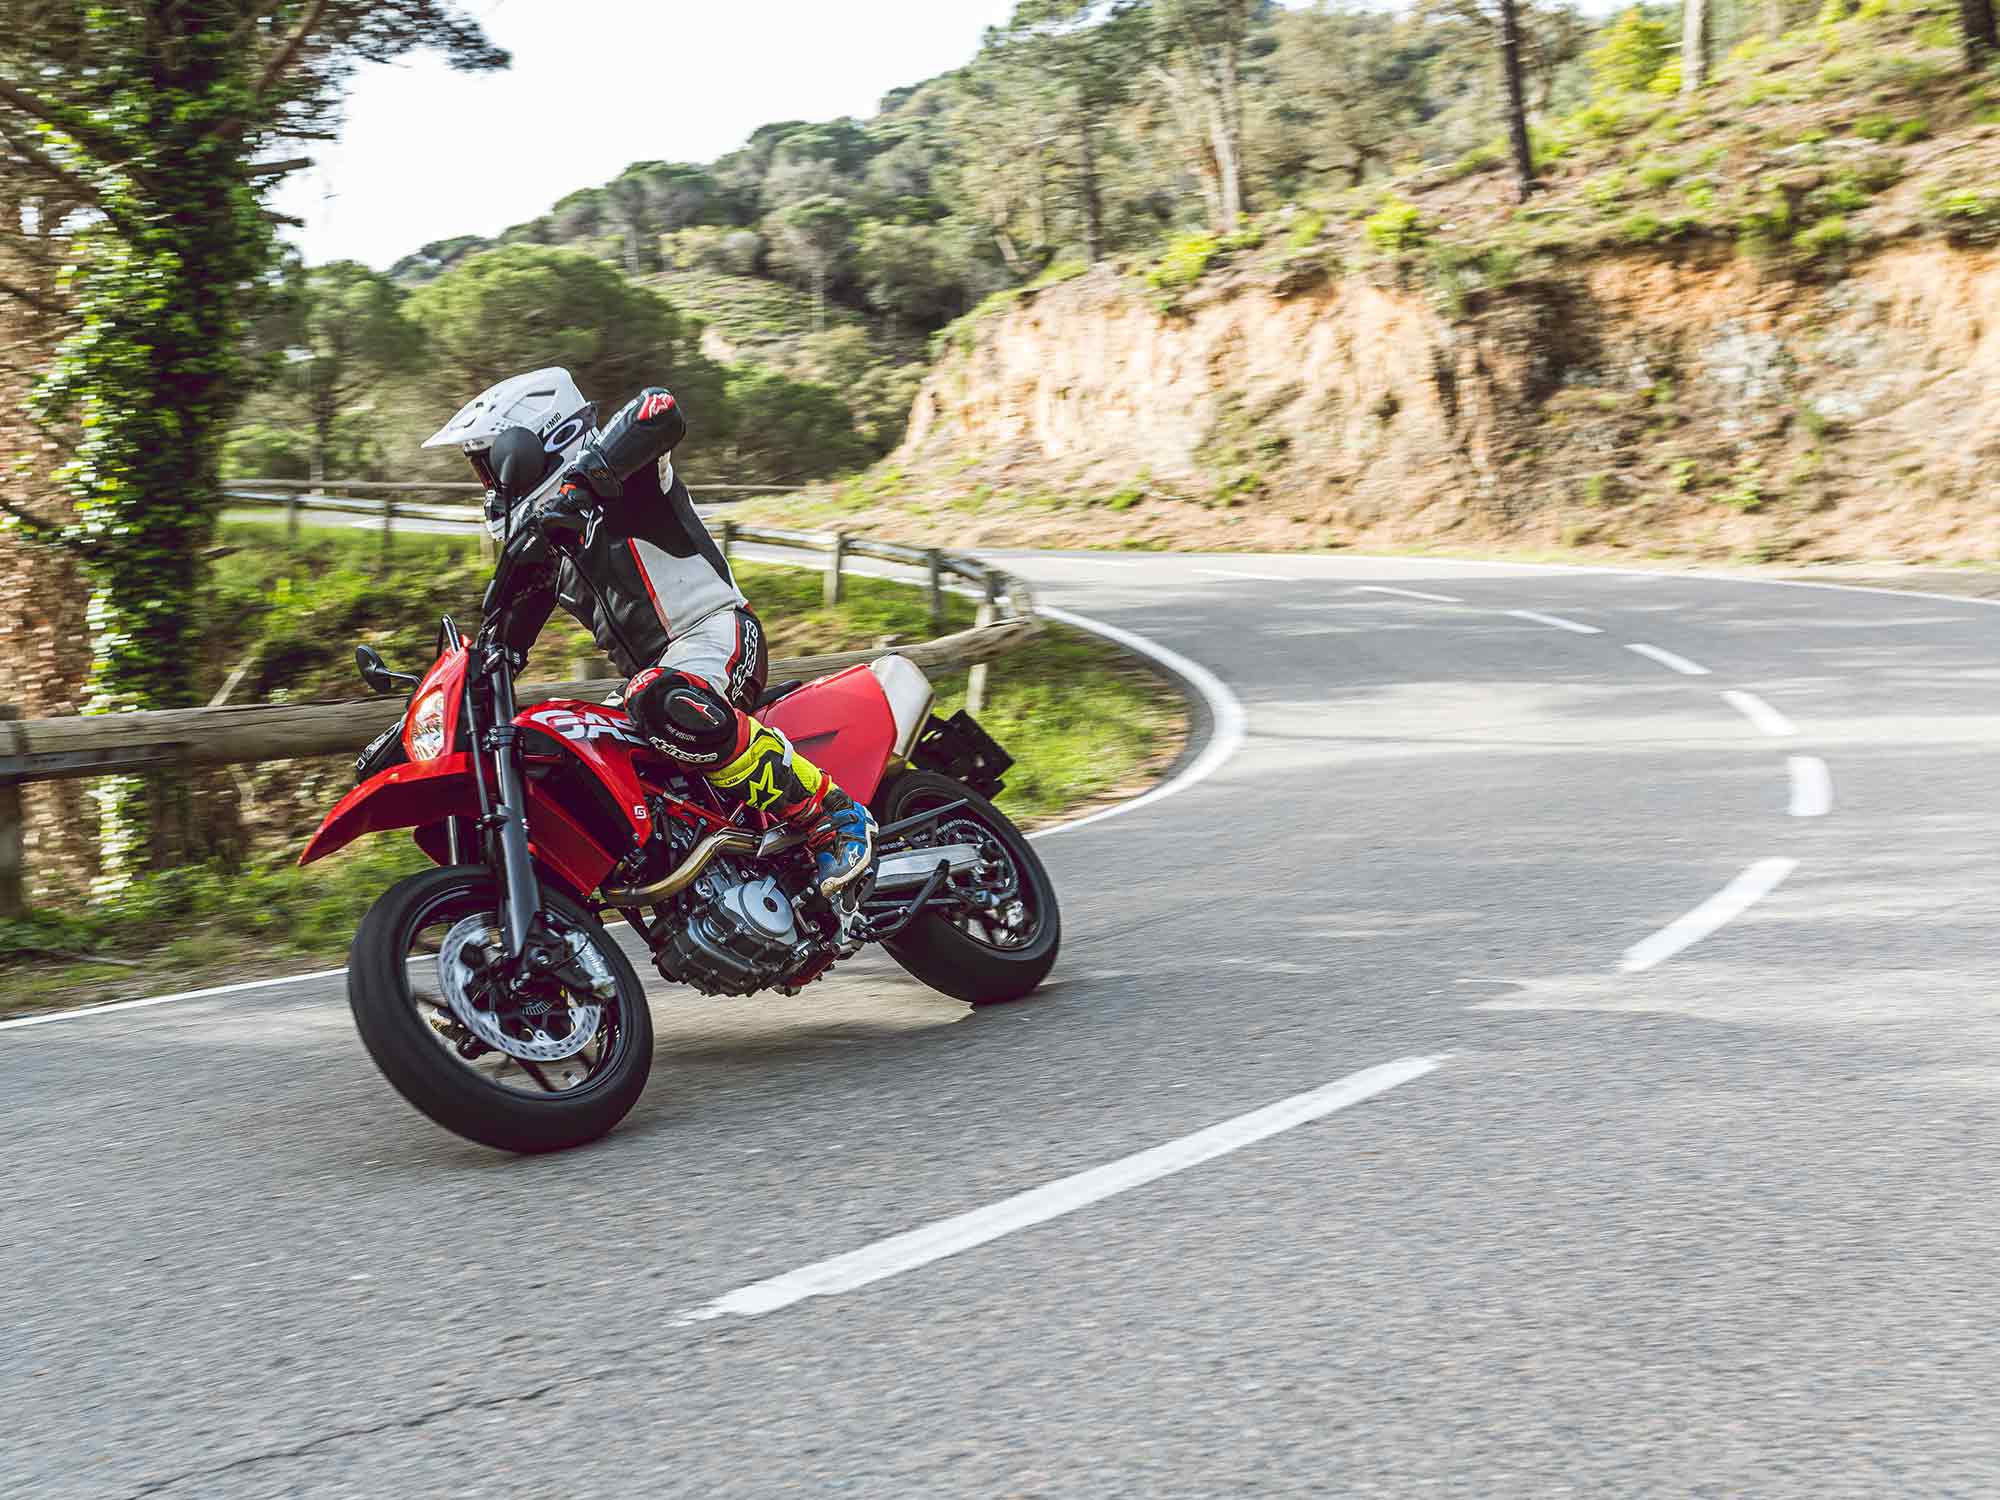 For effortless wheelies you’ll need to opt for the Supermoto mode.